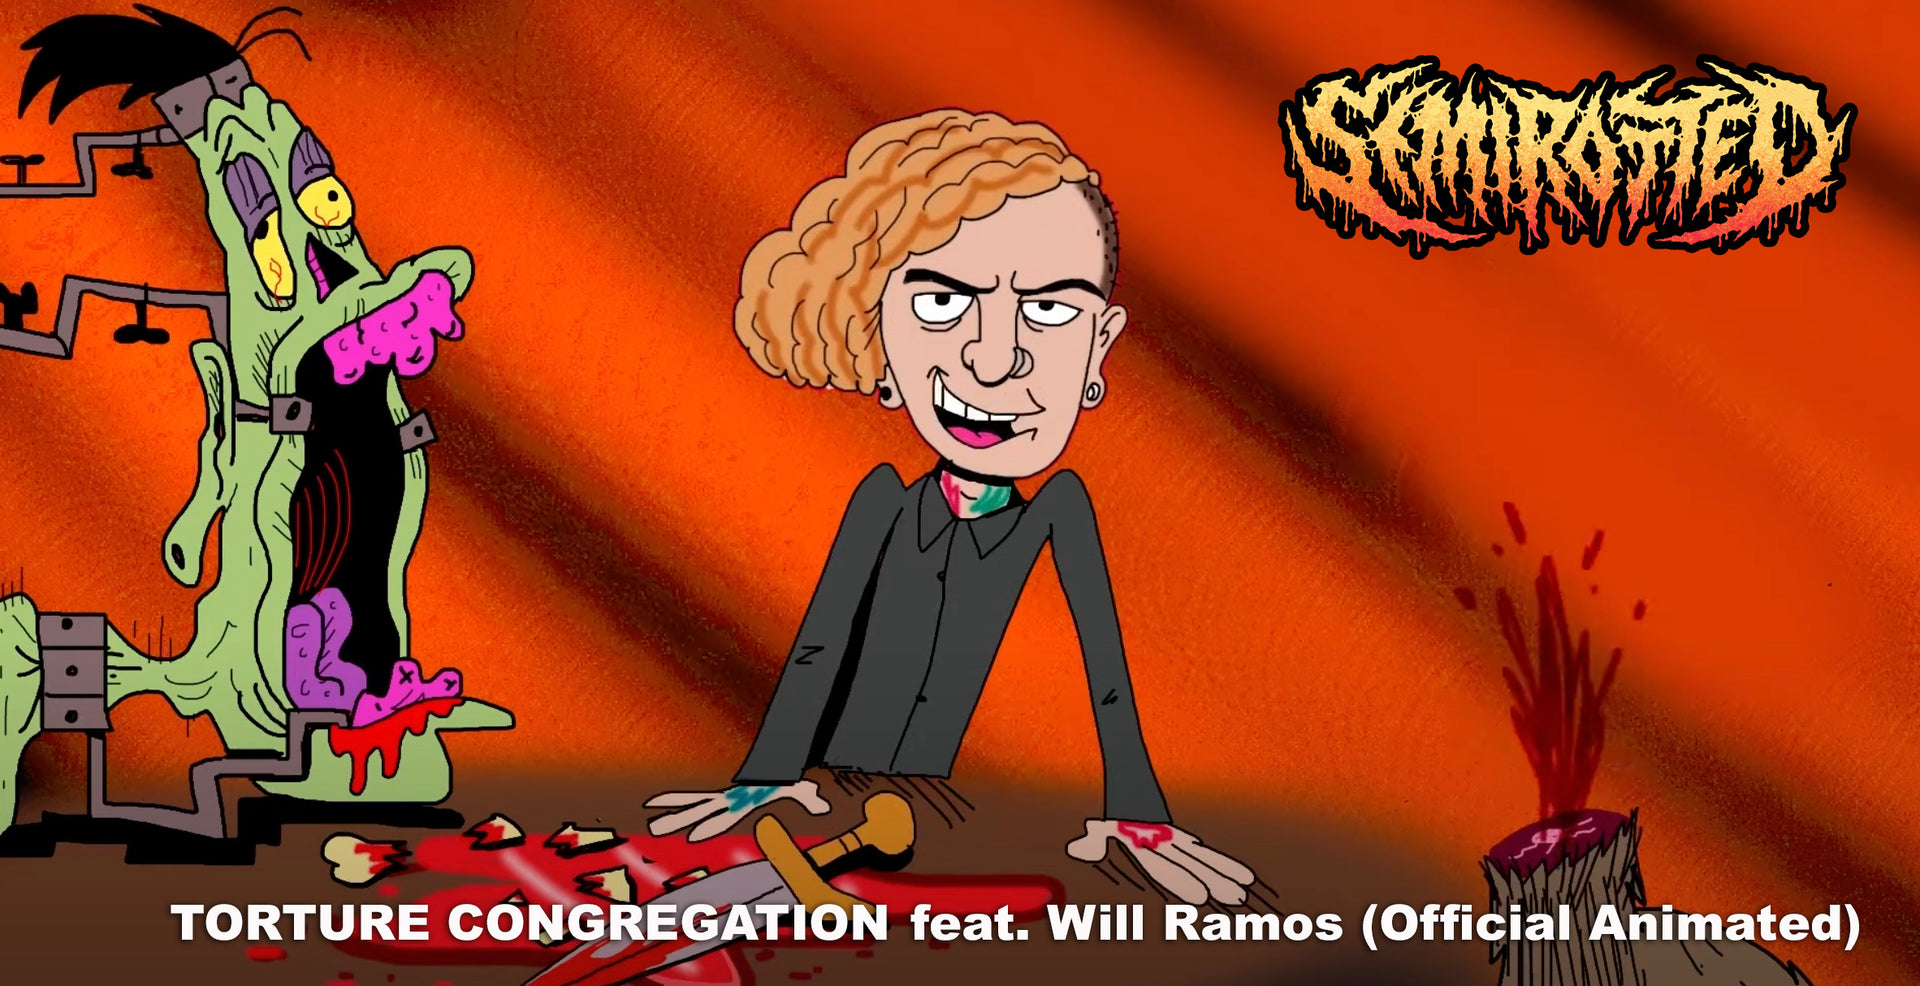 Load video: 0:31 / 2:46   TORTURE CONGREGATION feat. Will Ramos (Official Animated)